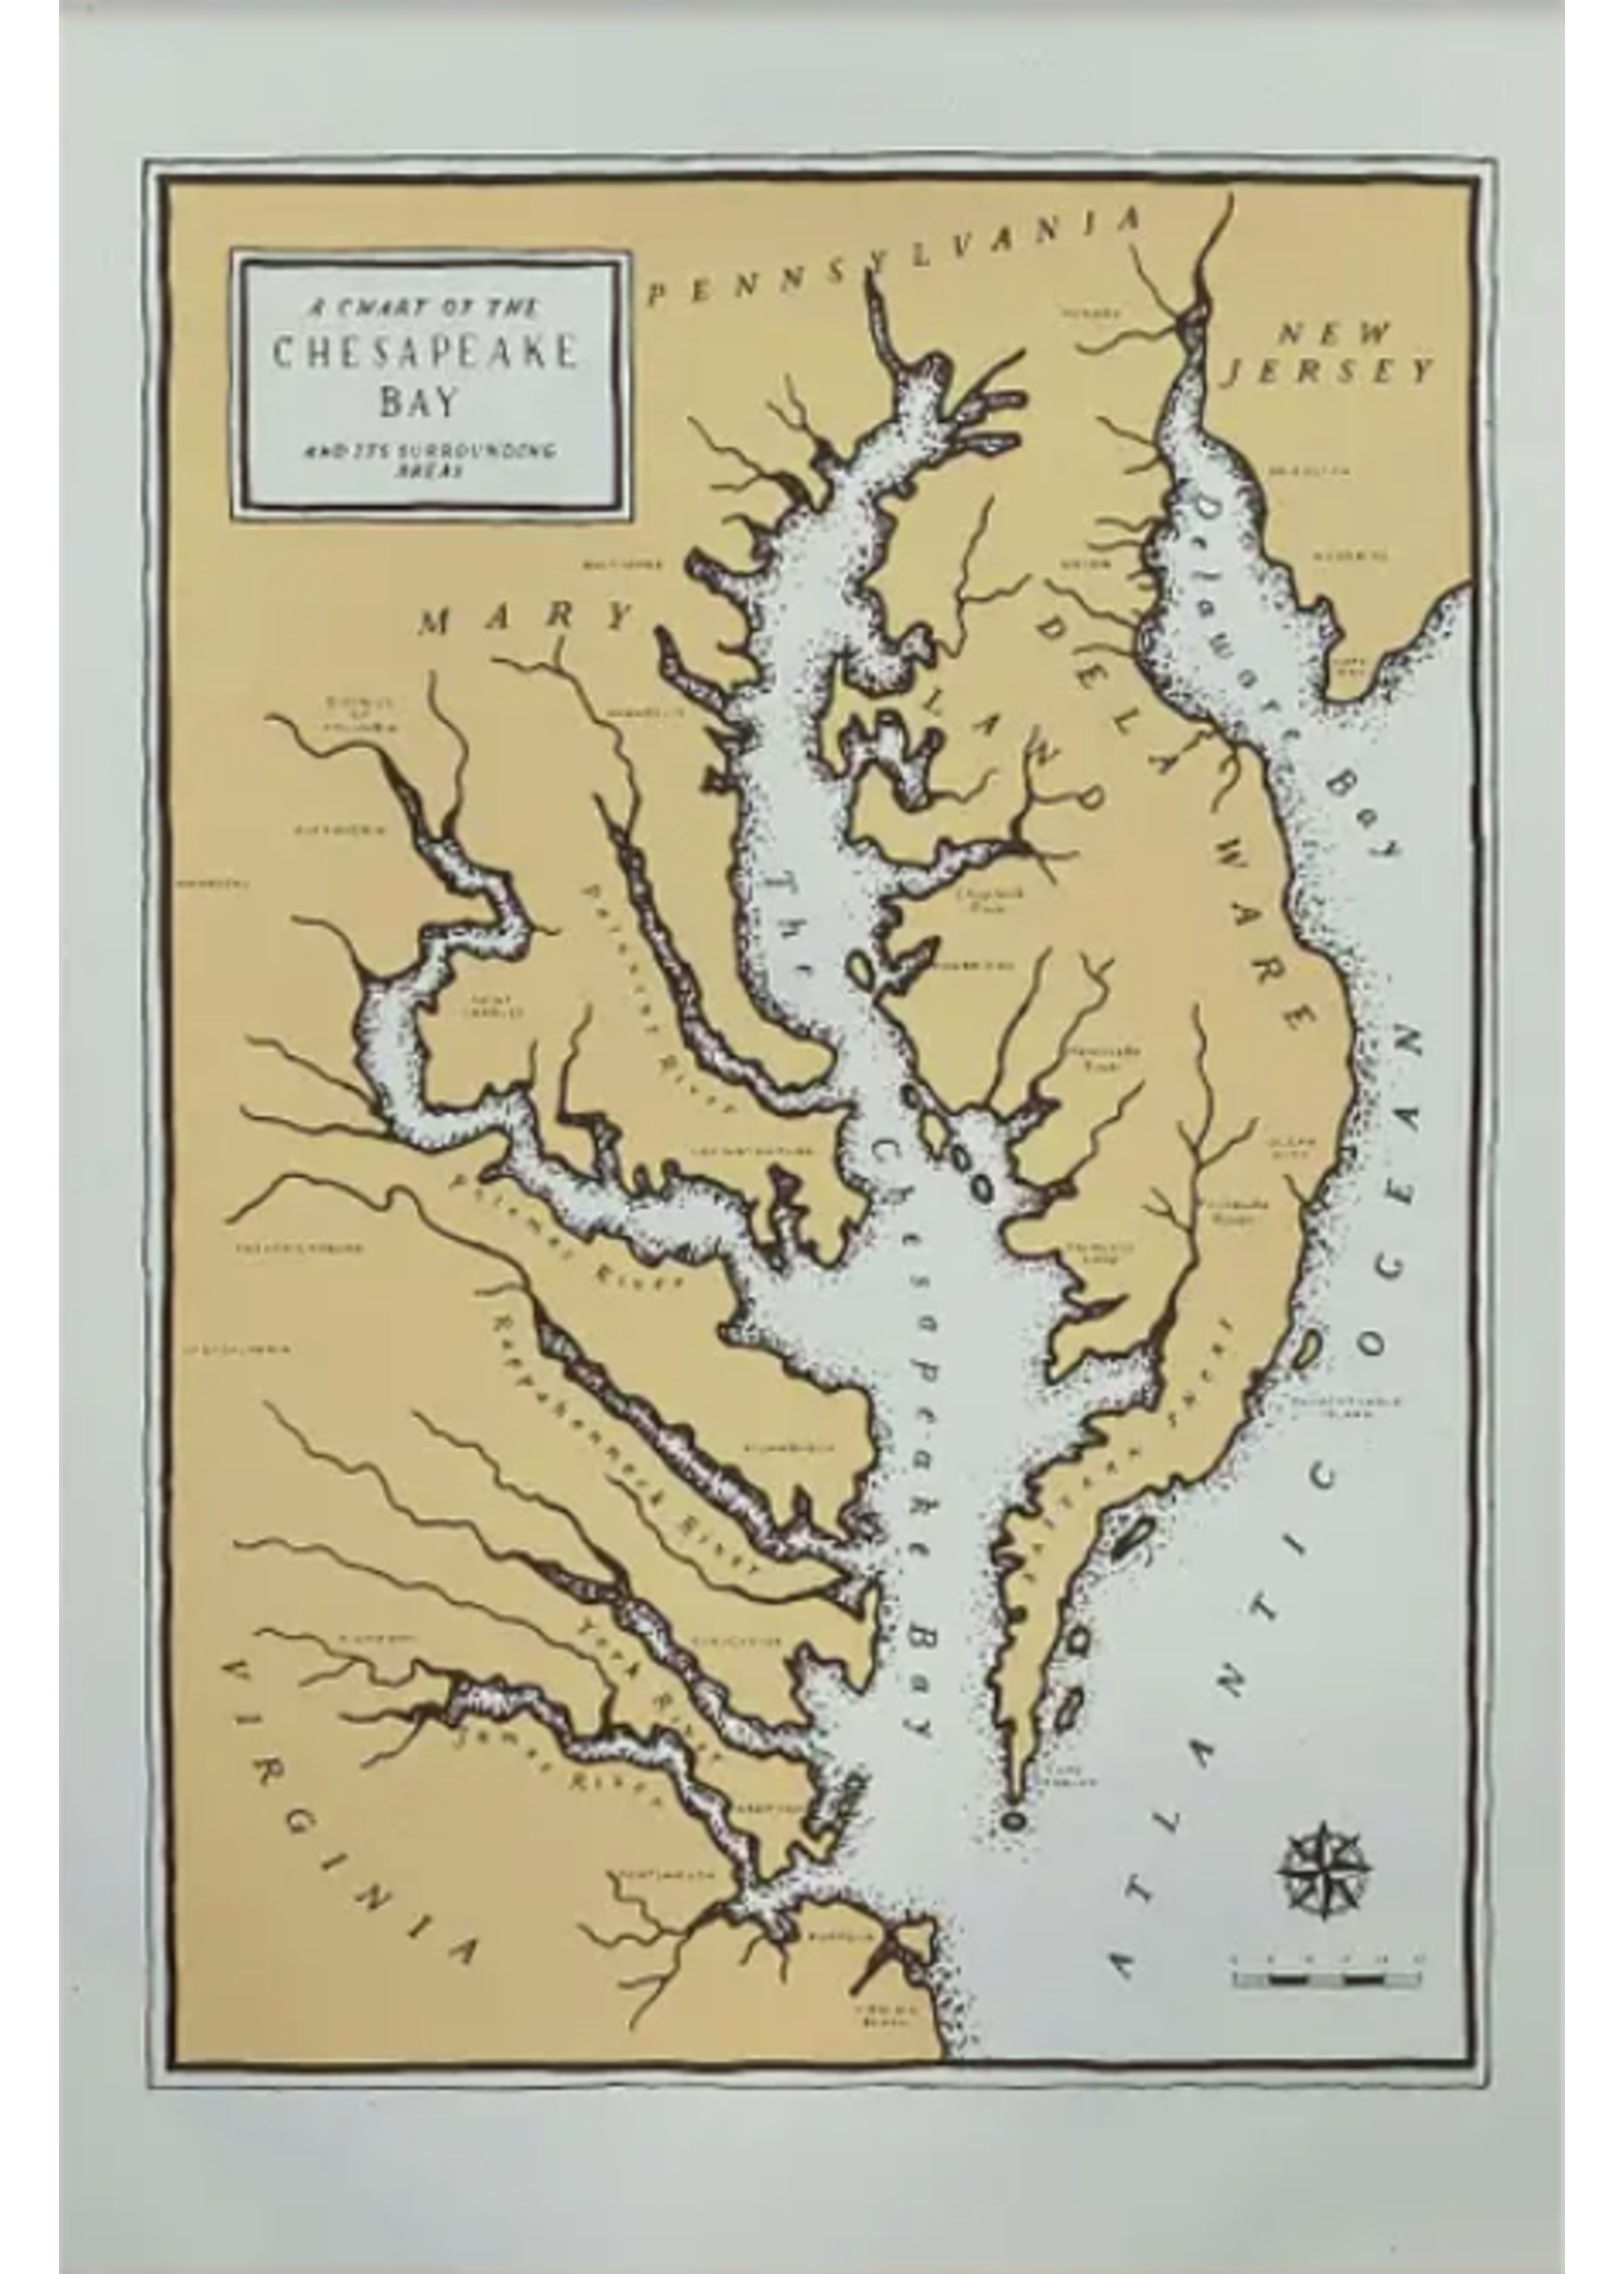 Faire - The Wild Wanderer Poster, Chesapeake Map 11" x 17"